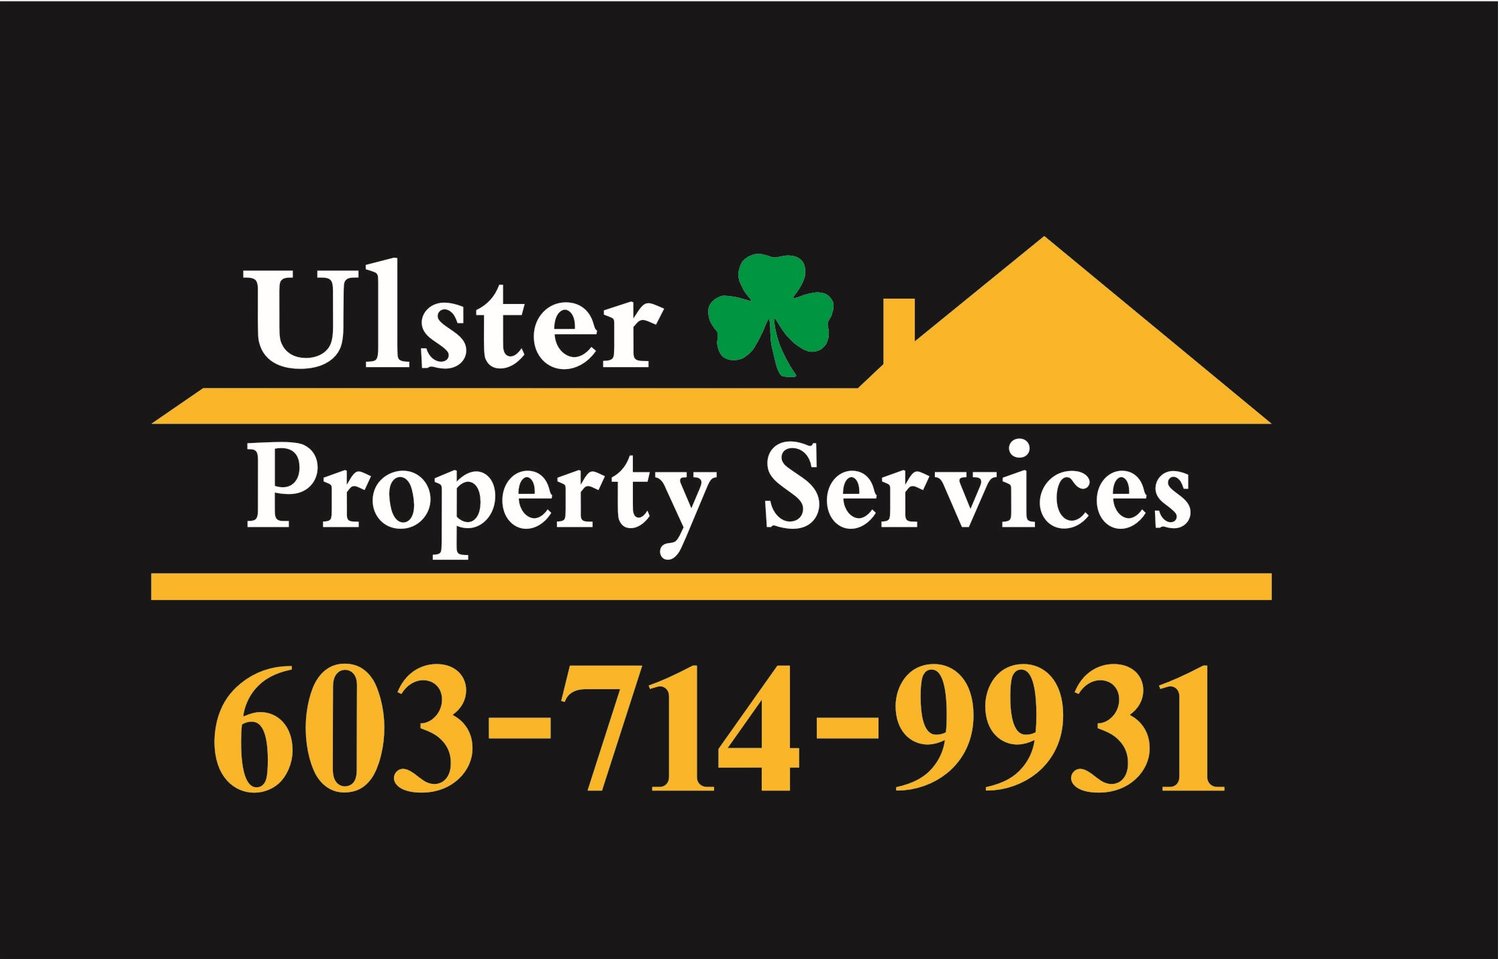 Ulster Property Services